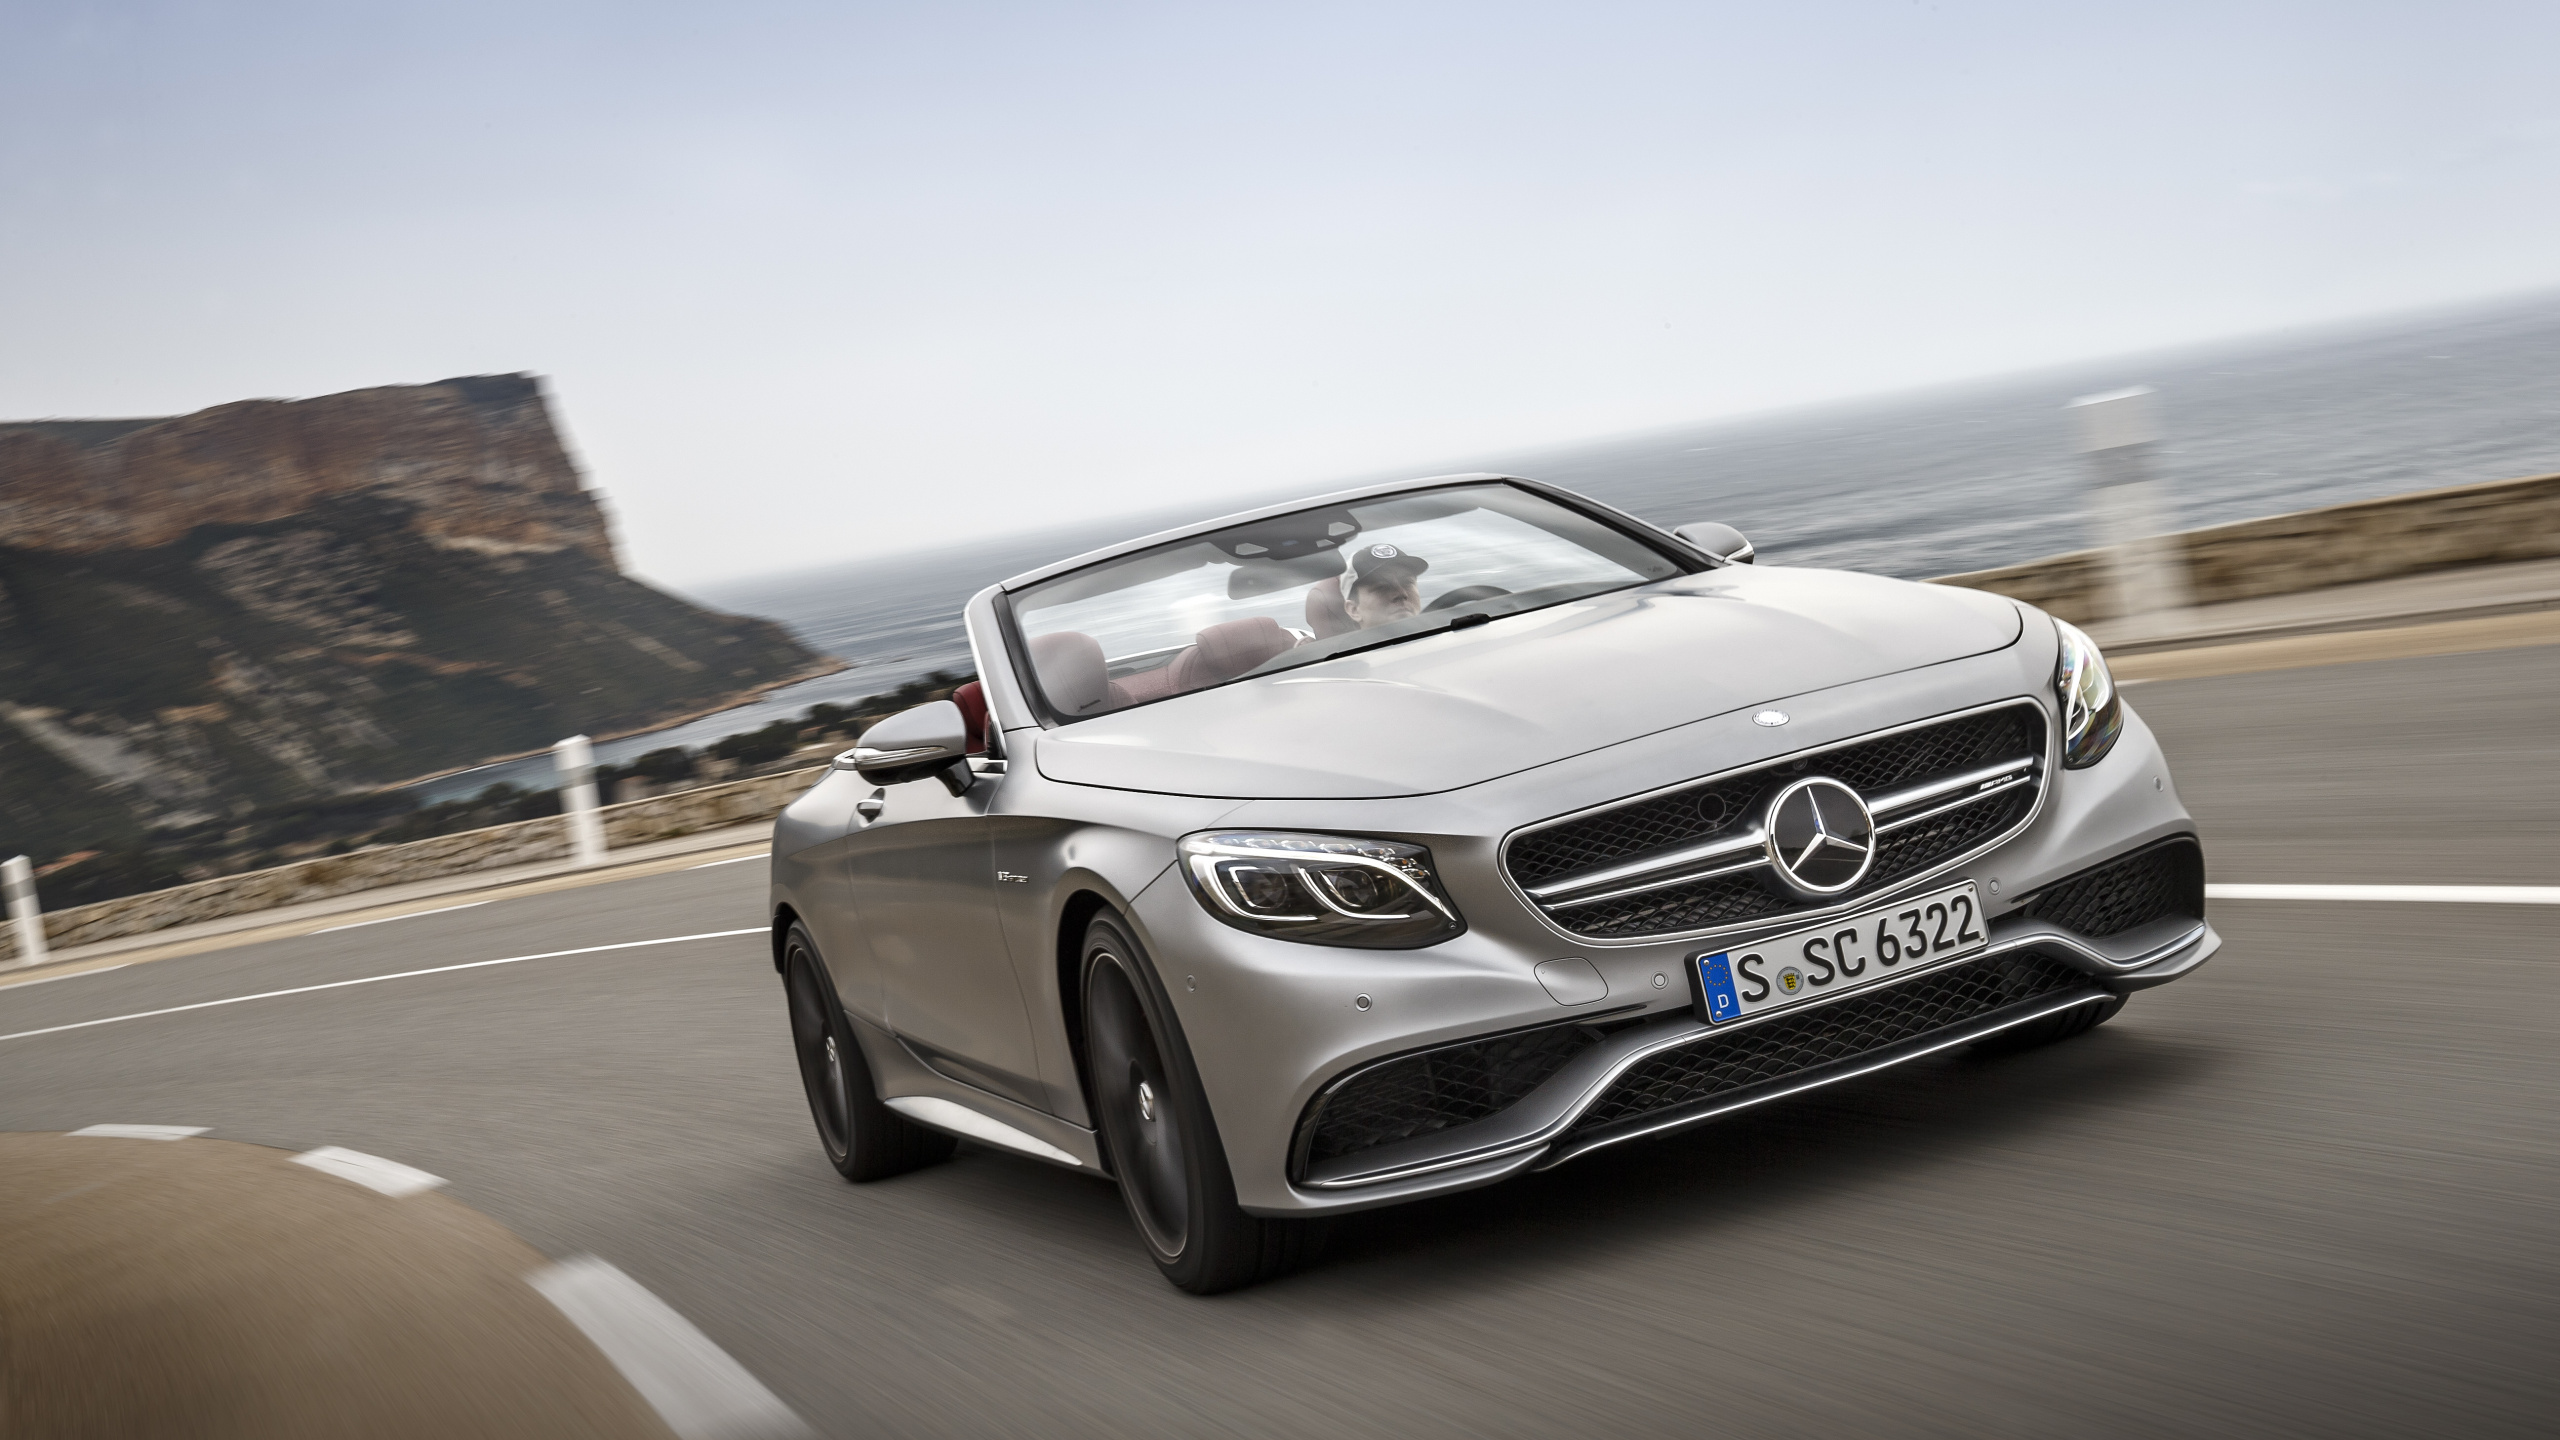 Gray Mercedes Benz Convertible Coupe on Road During Daytime. Wallpaper in 2560x1440 Resolution